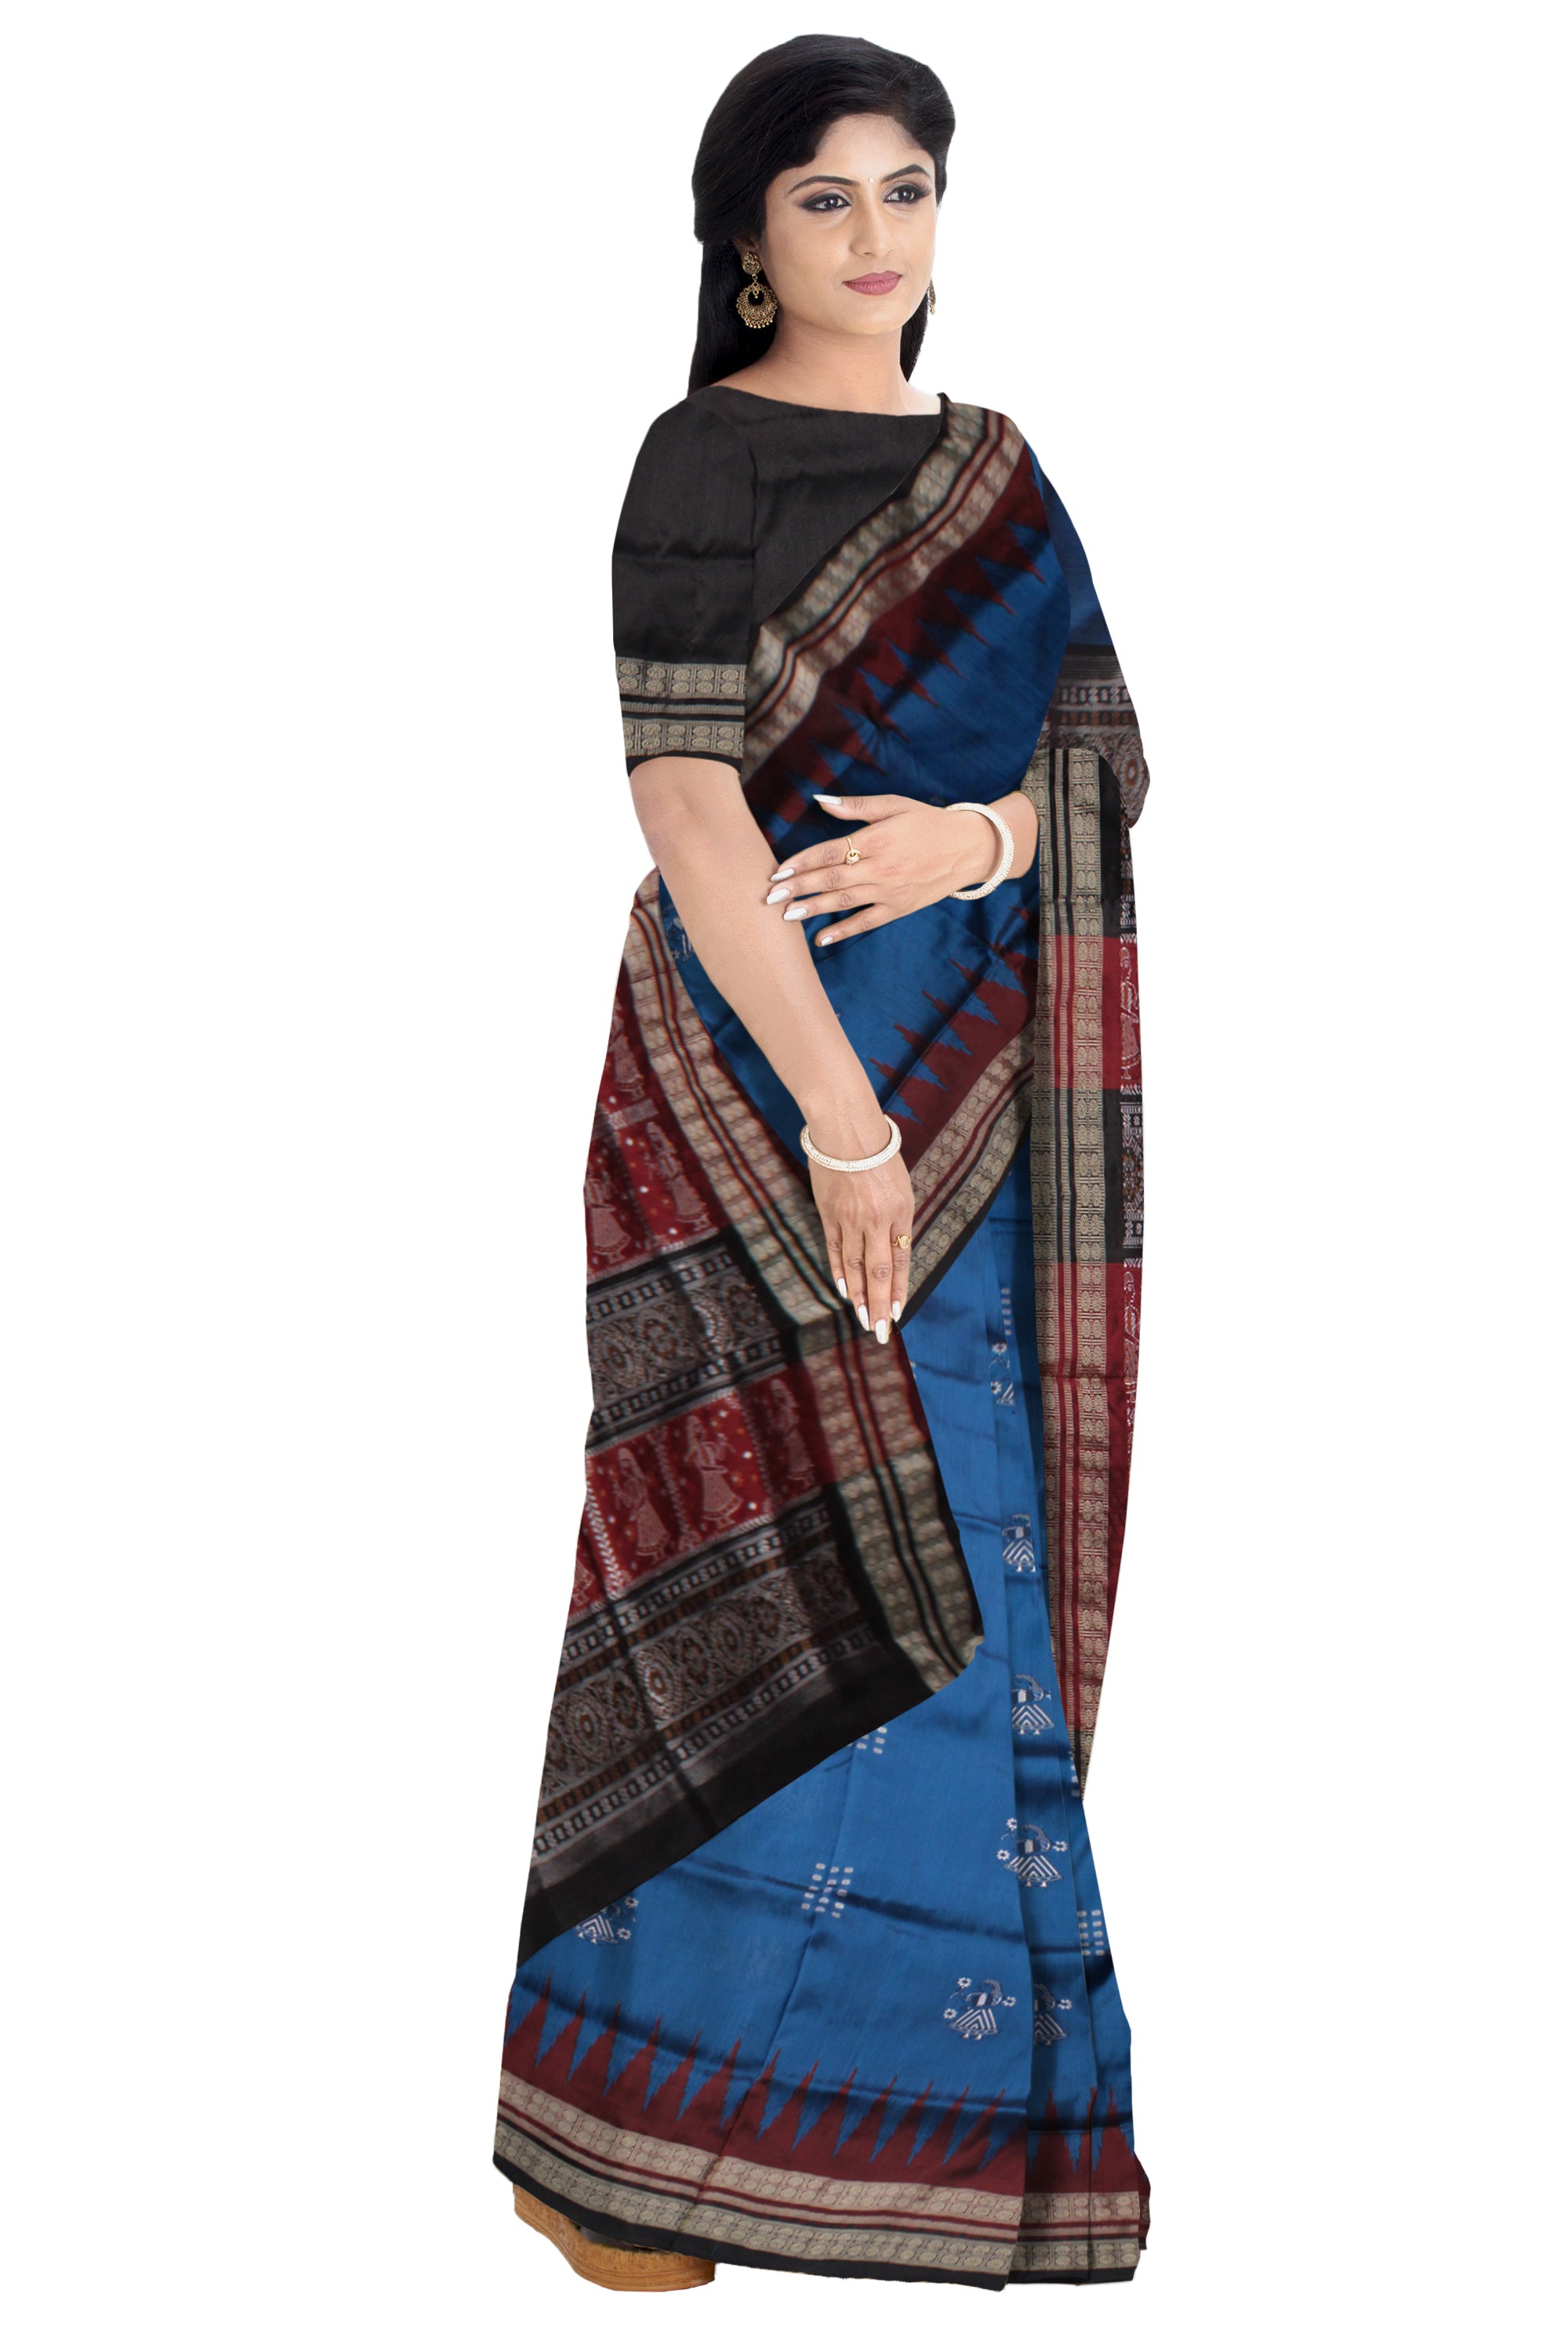 SY-BLUE,MAROON AND BLACK COLOR DOLL PATTERN PATA SAREE,WITH BLOUSE PIECE. - Koshali Arts & Crafts Enterprise